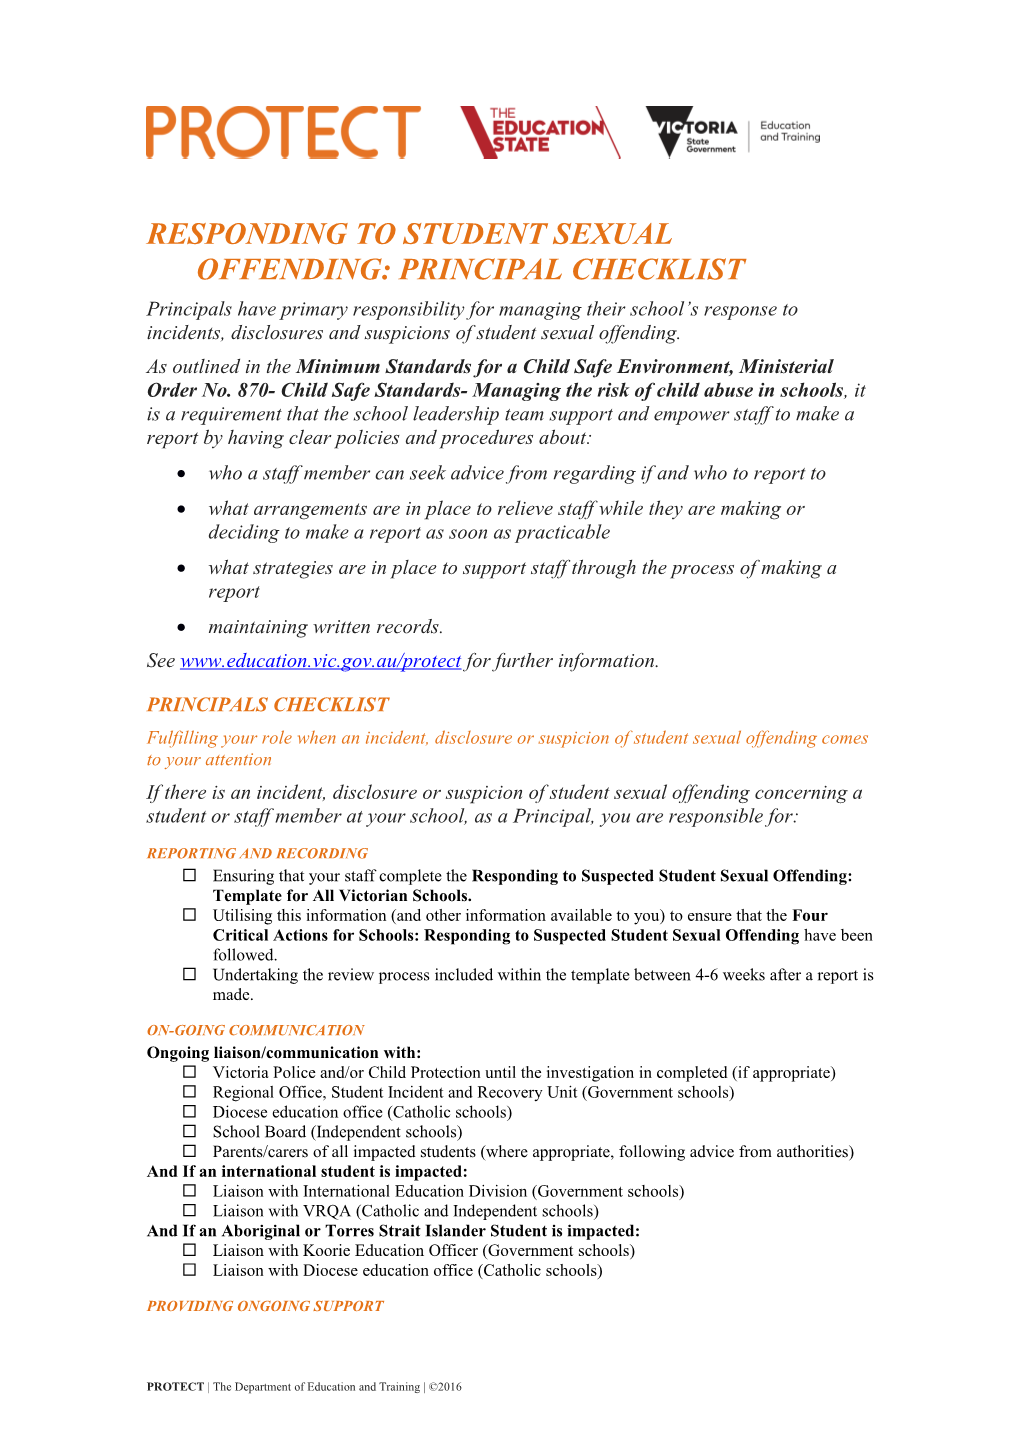 Responding to Student Sexual Offending: Principal Checklist